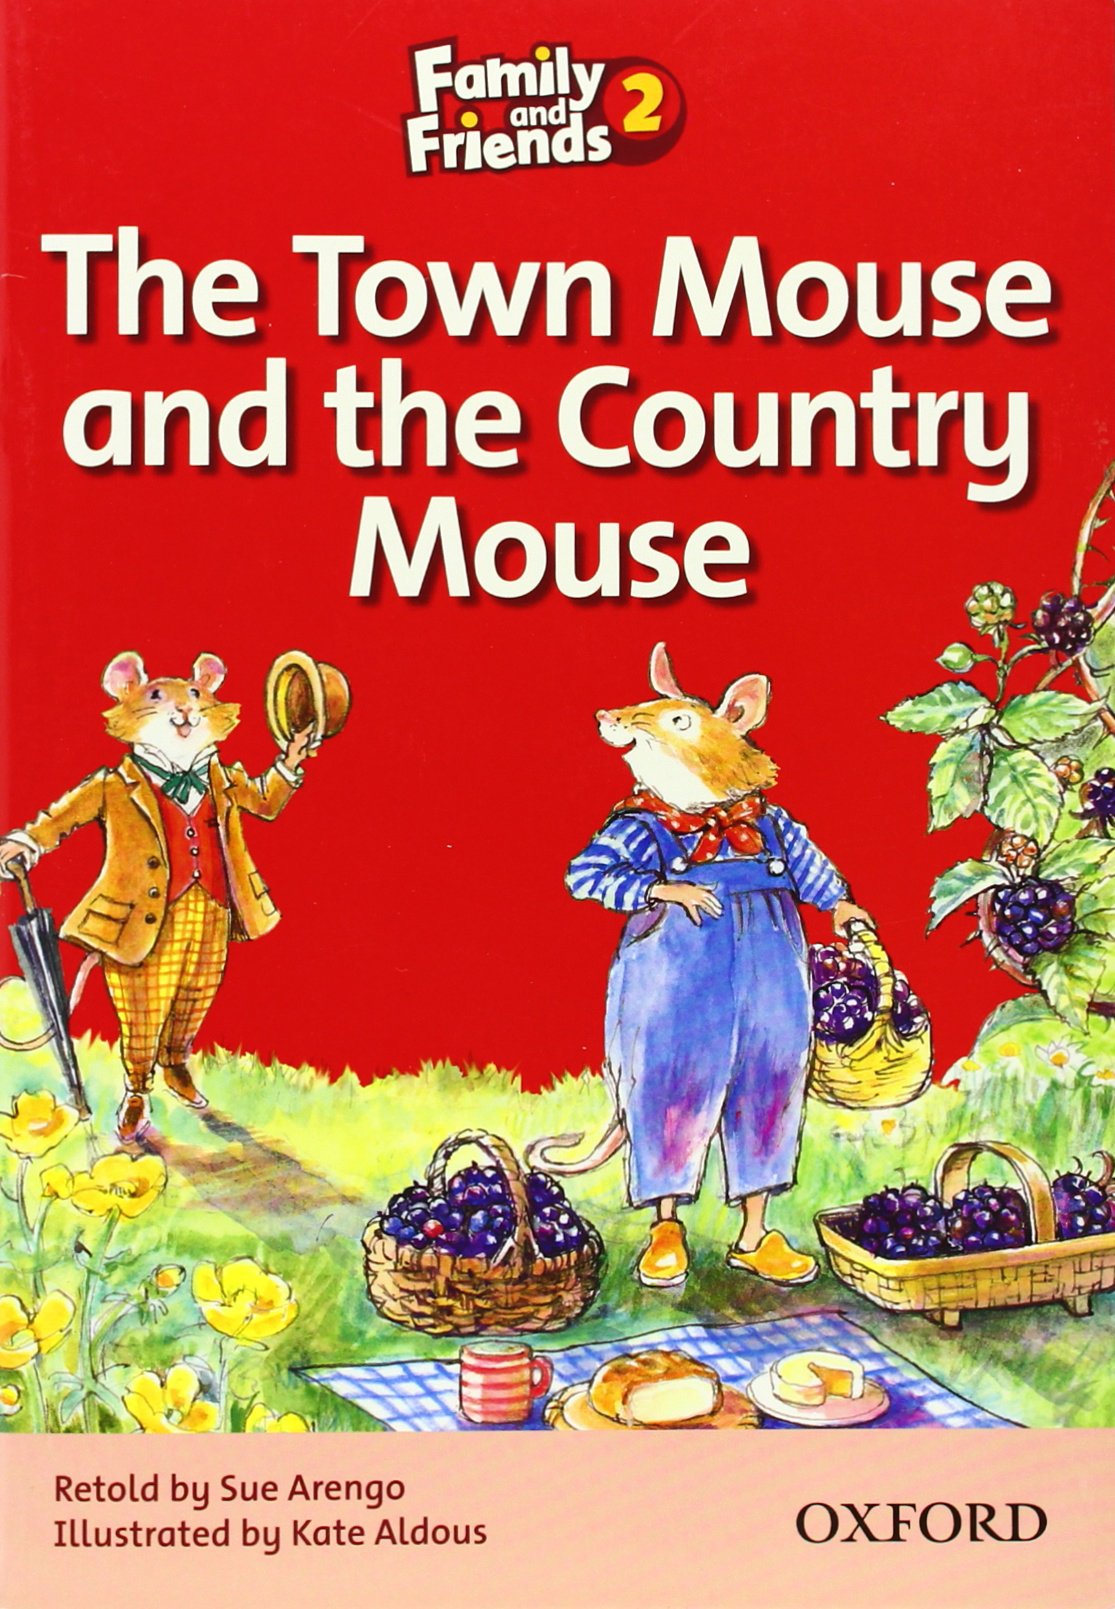 Family and Friends Readers 2 - The Town Mouse and the Country Mouse